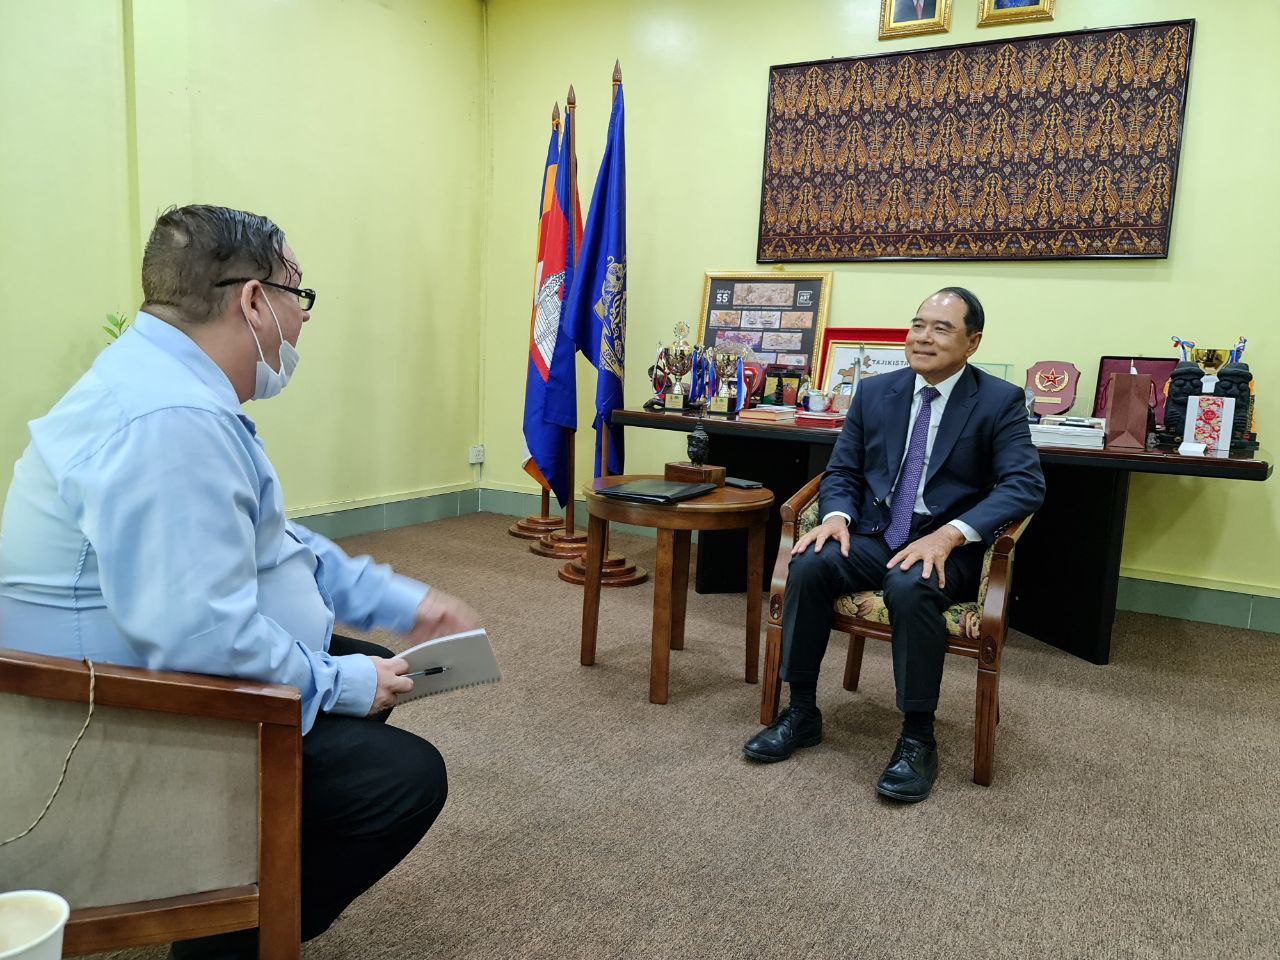 Leader talks: H.E. Ly Thuch on the economic benefits of a mine free Cambodia